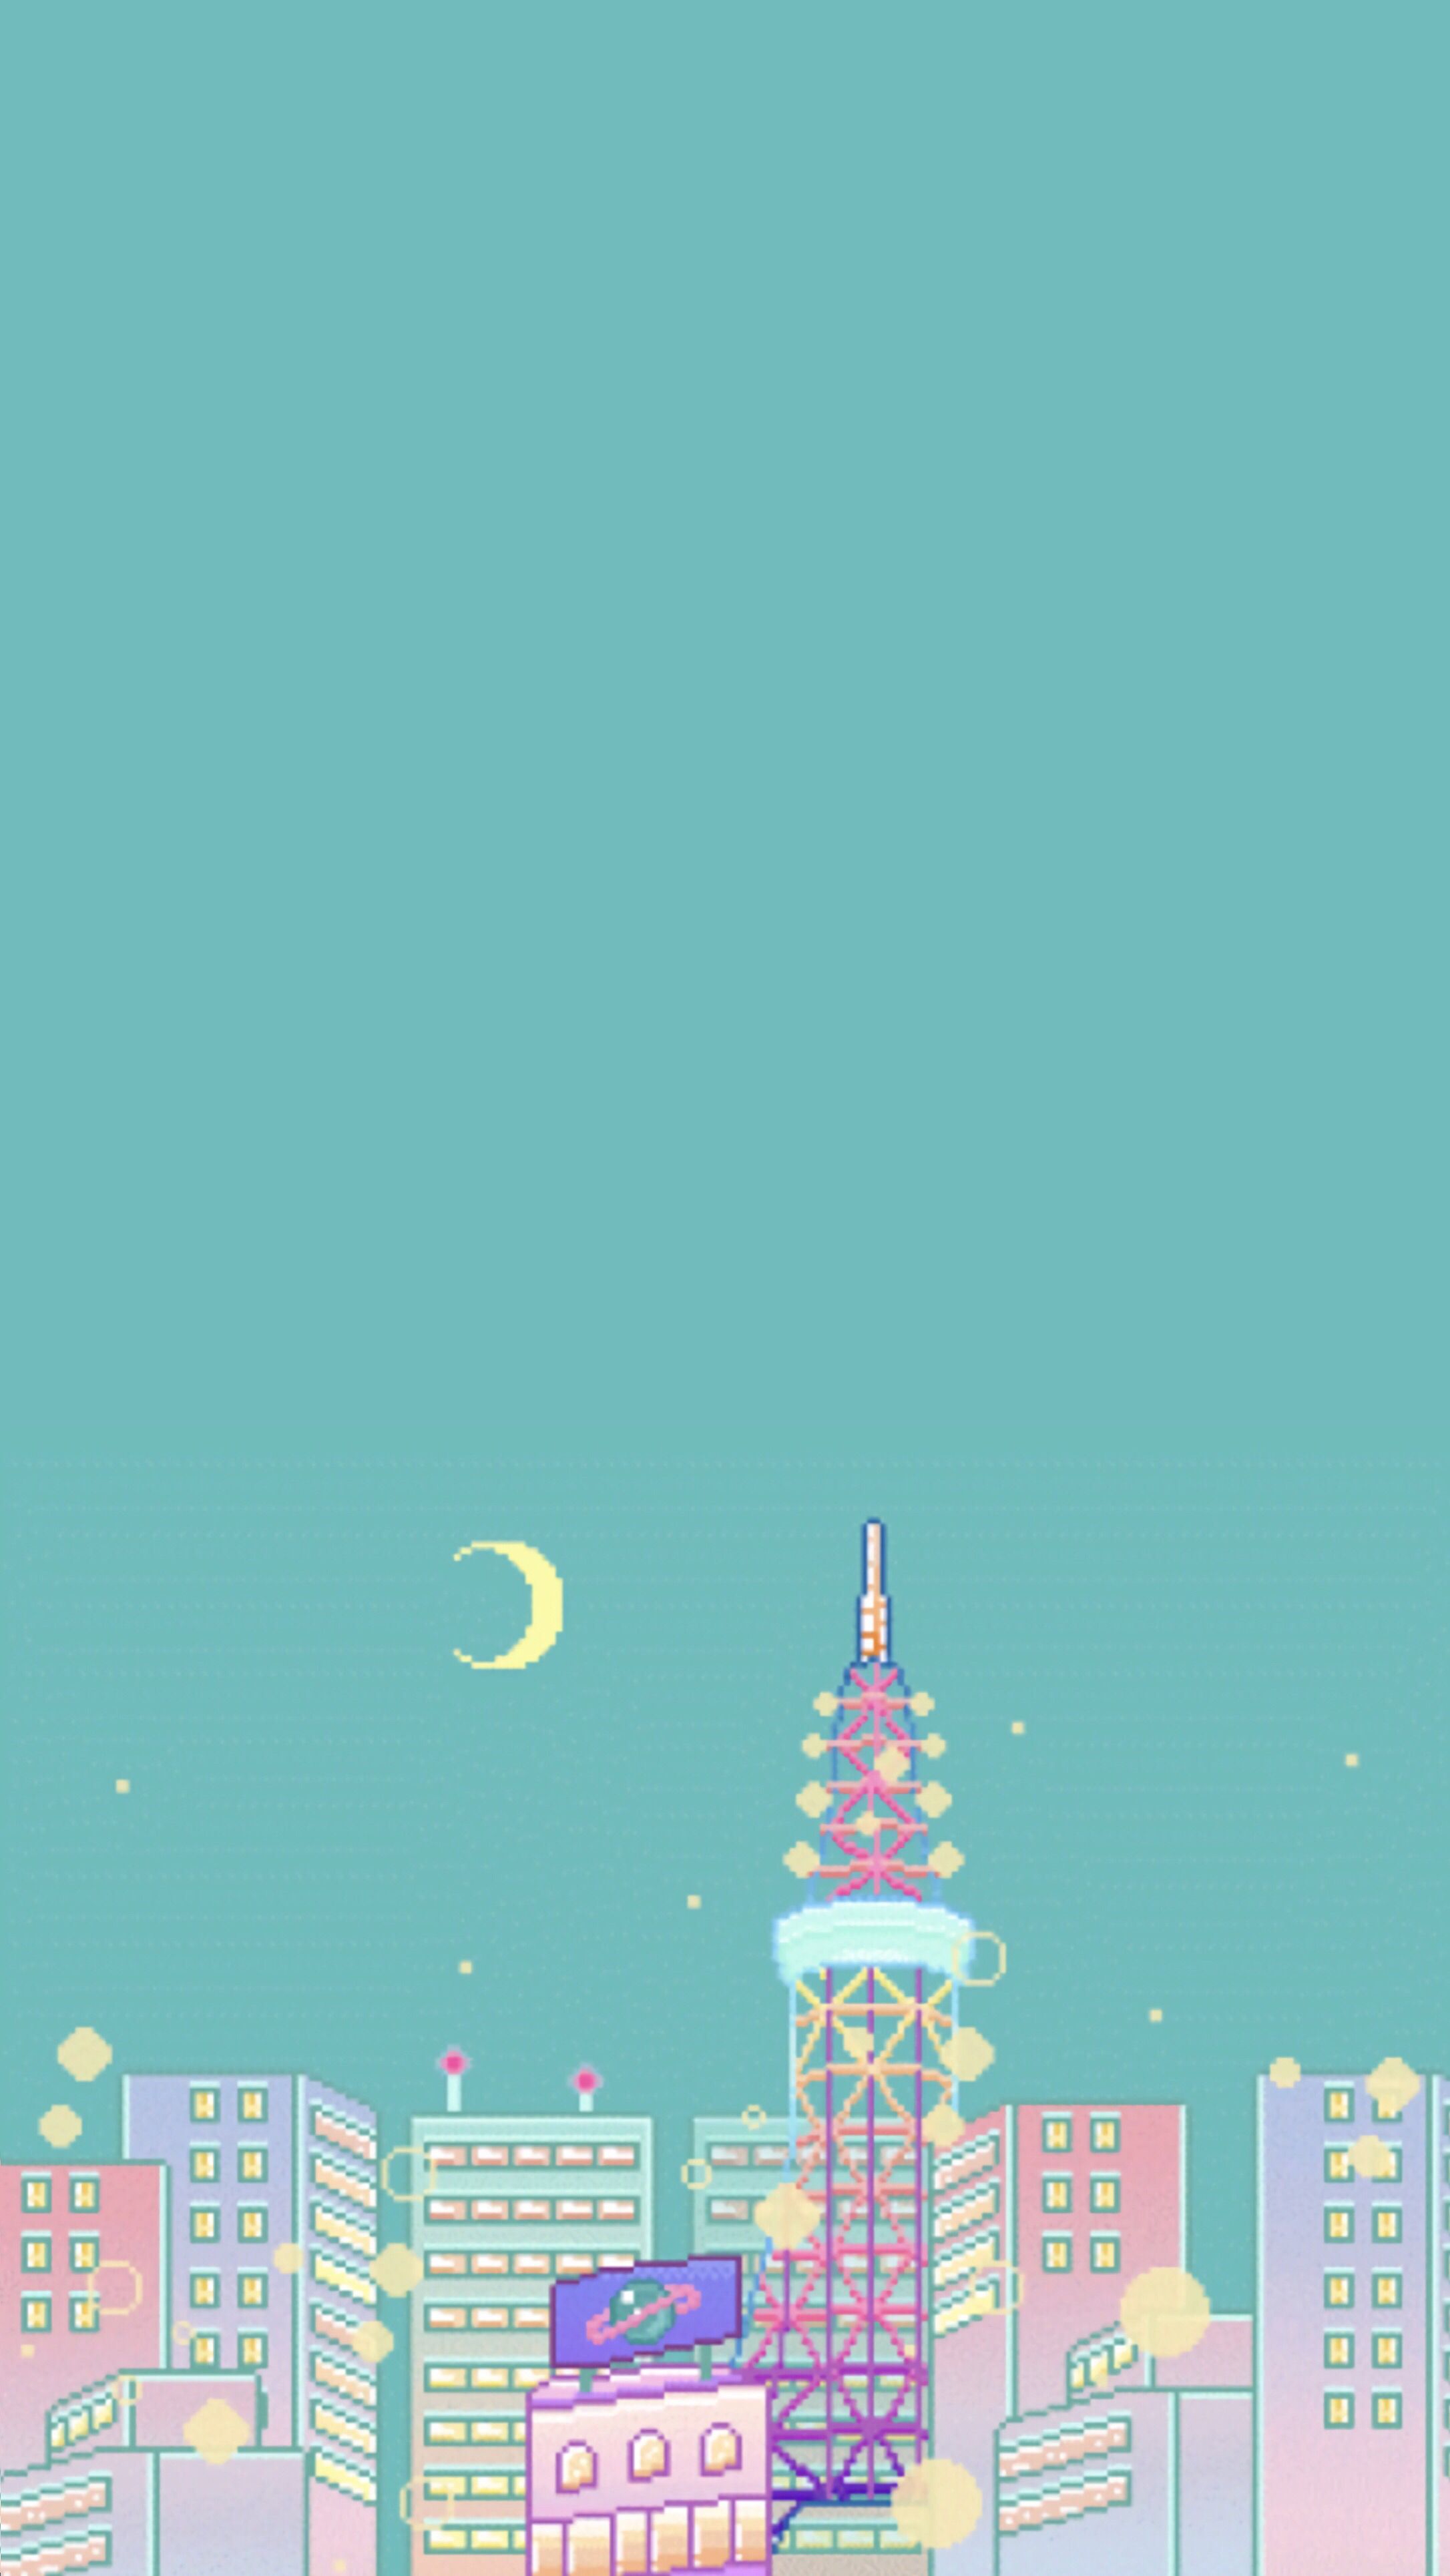 A phone wallpaper of a cityscape with a half moon in the sky - Pixel art